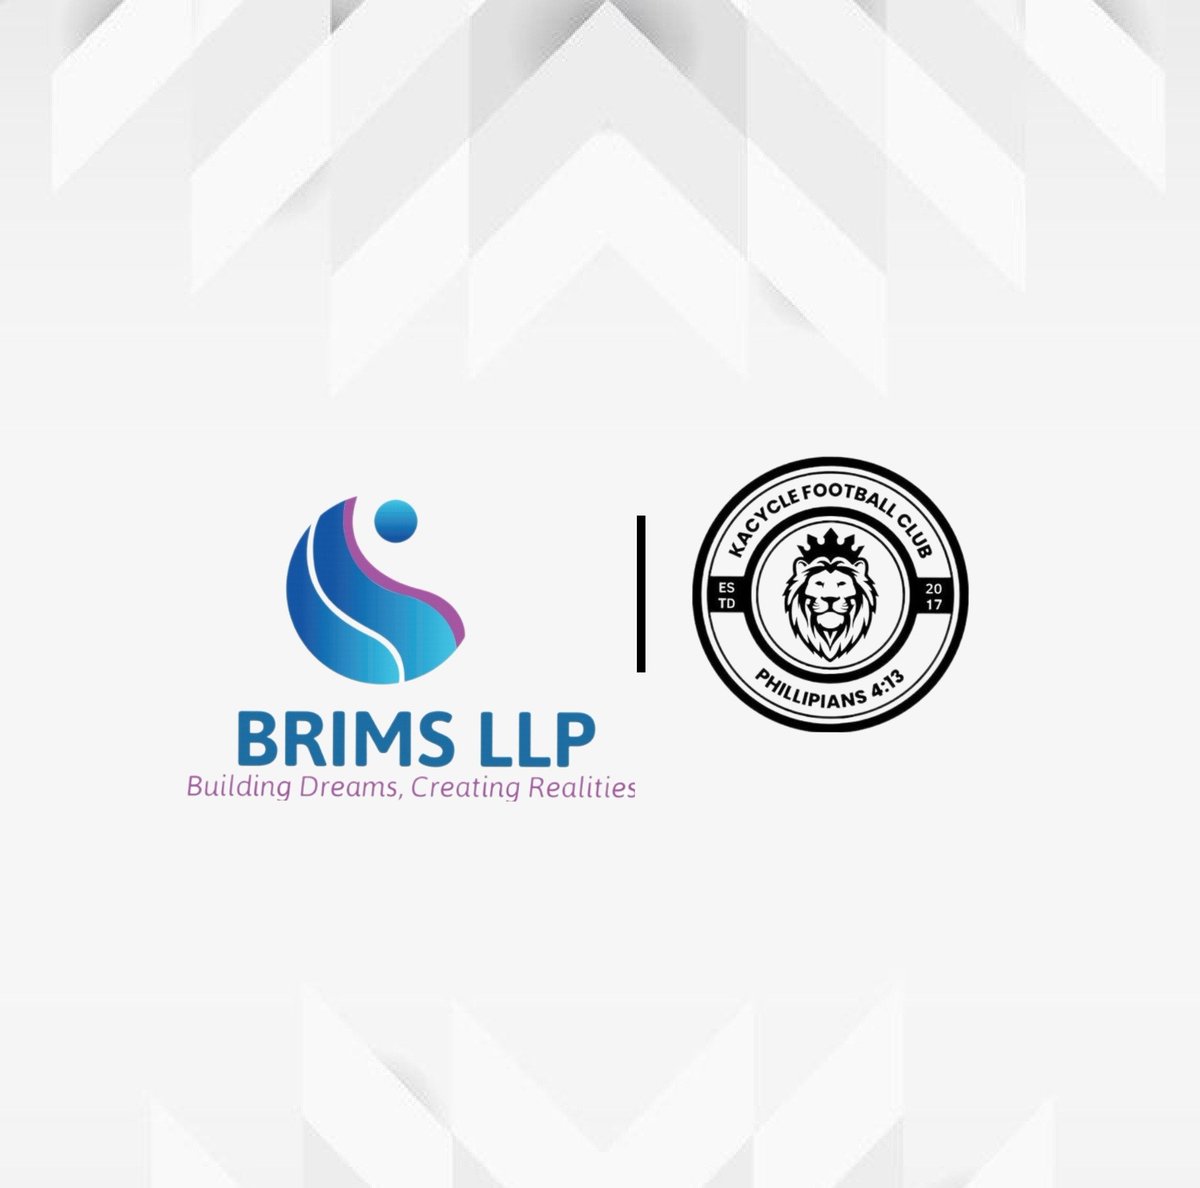 📢'Exciting news!

 We're thrilled to announce our new sponsor, Brims LLP! We're grateful for their belief in our mission and look forward to a successful partnership! 
@BrimsLlp 
@ndejjeleague 
#KacyleNkuNtinko